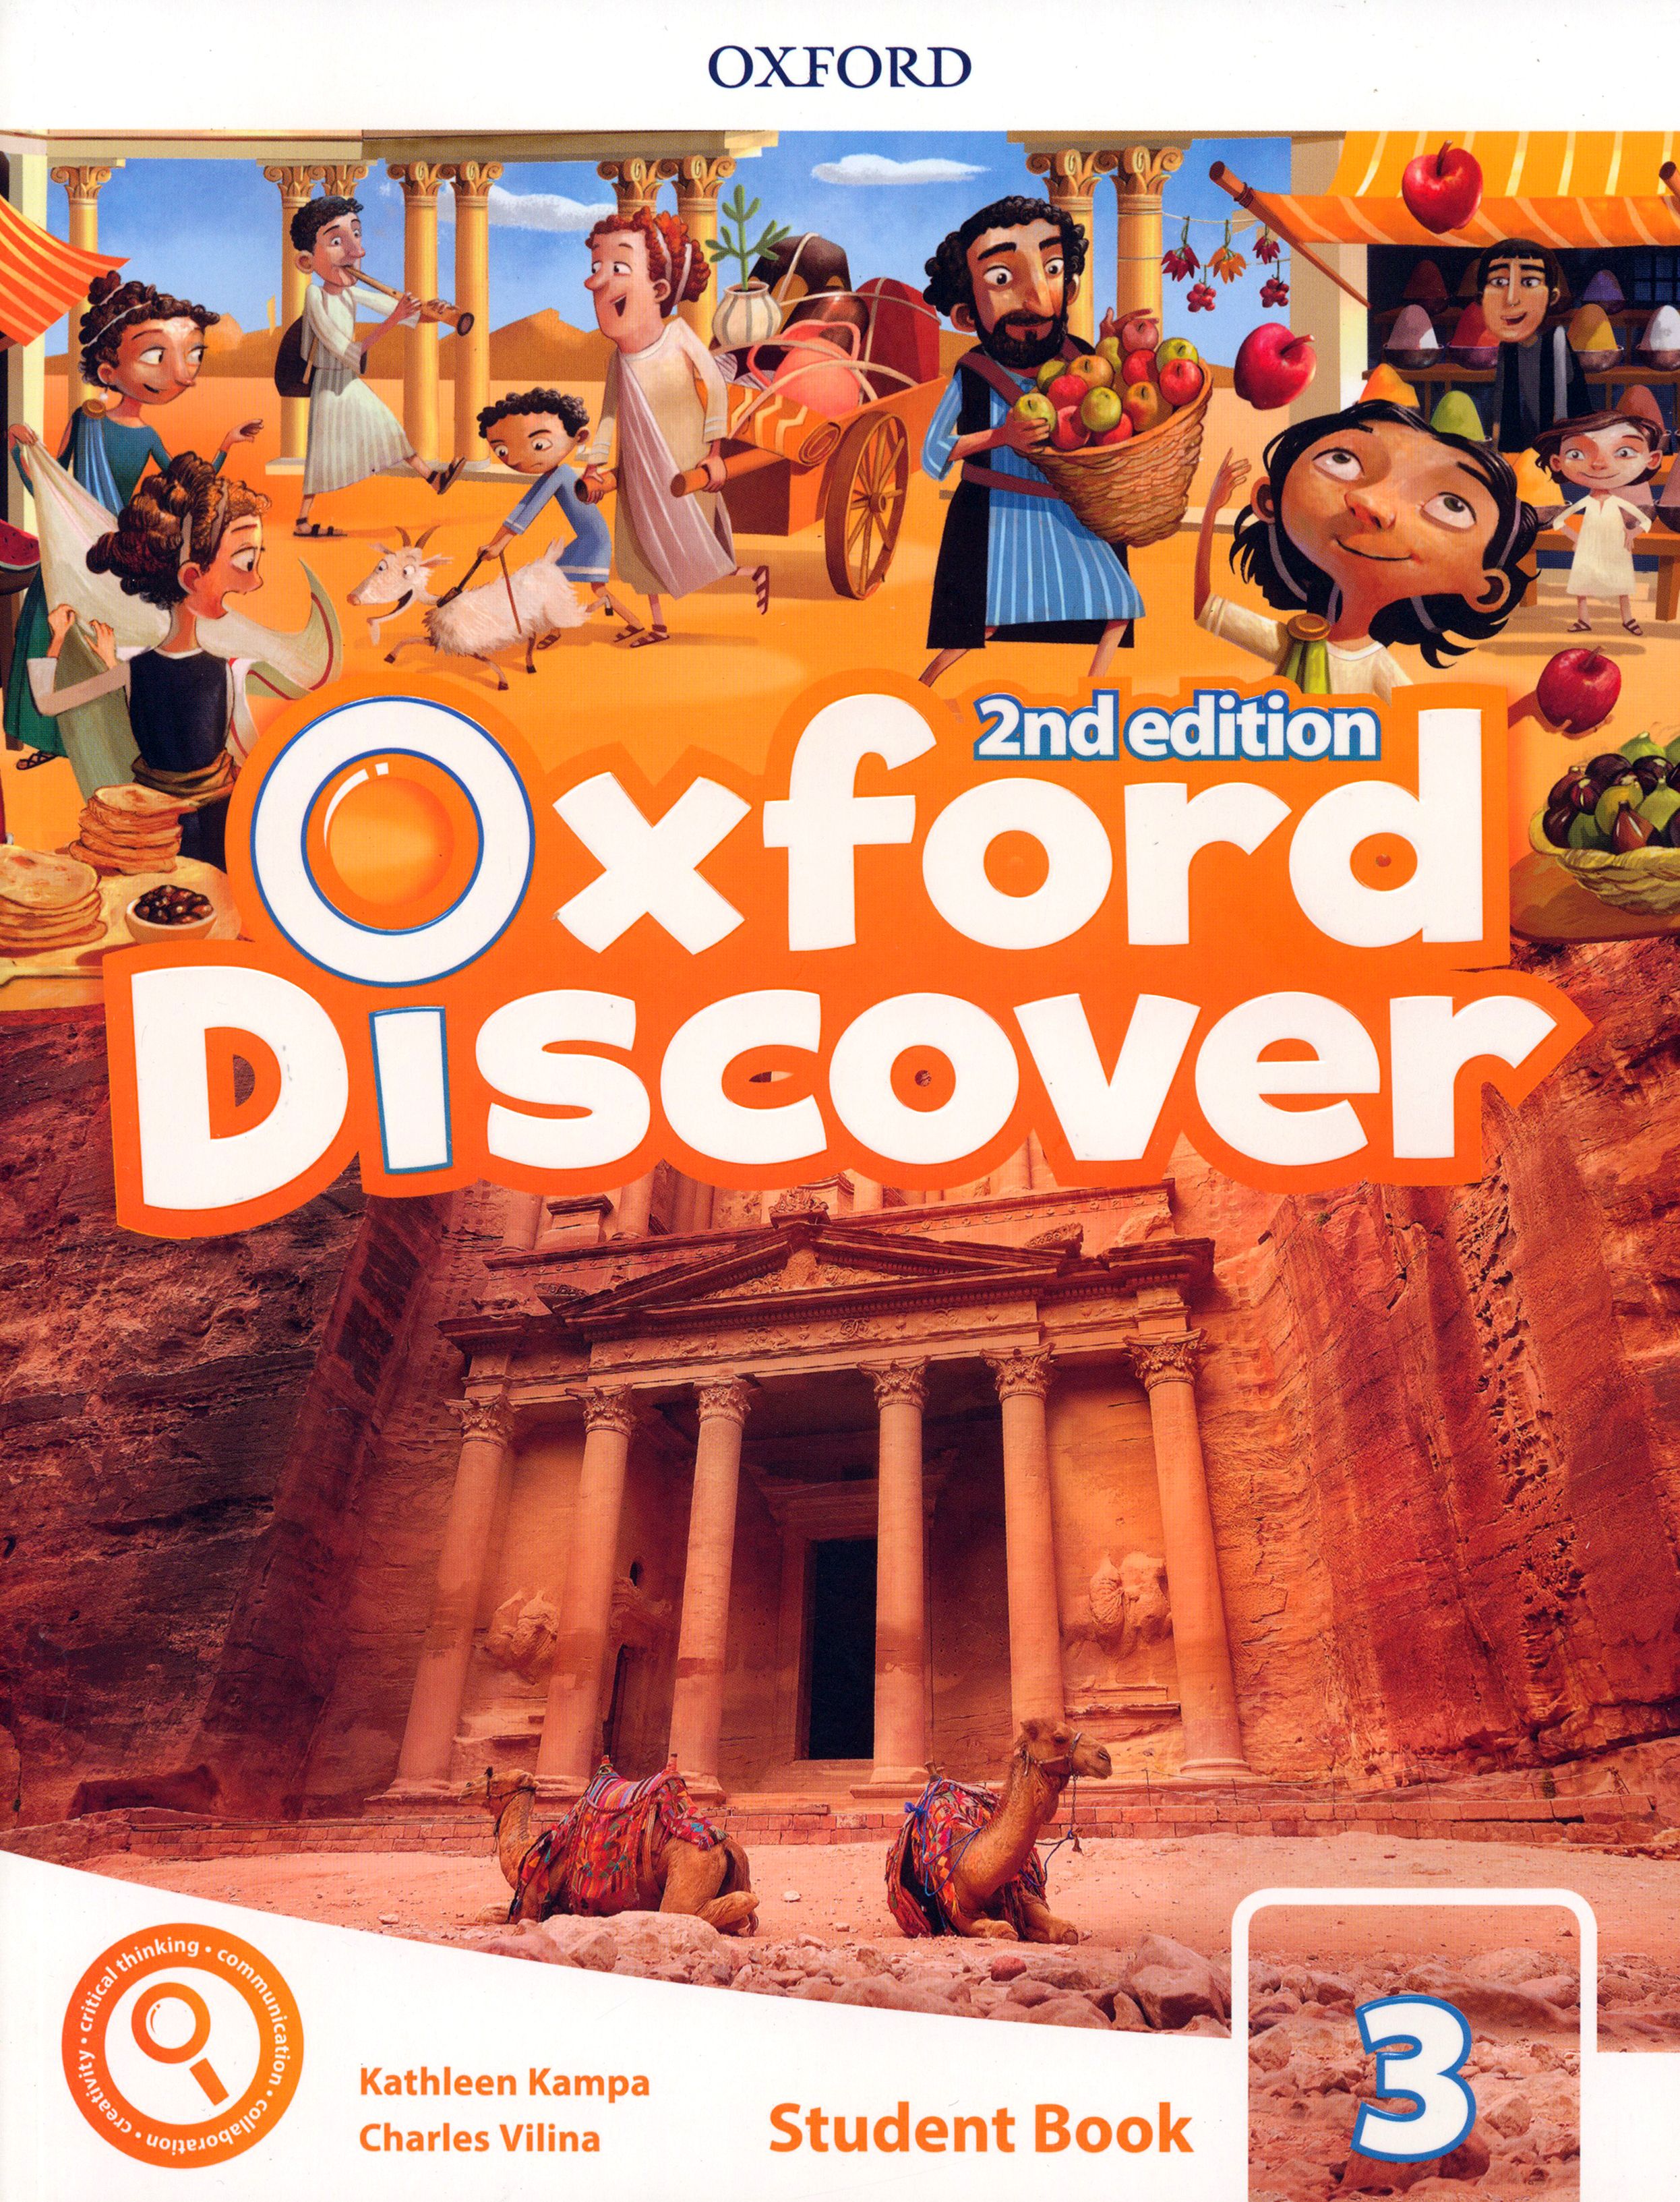 Oxford discover (2nd Edition) 3 student's book. Oxford discover 1 student's book 2nd Edition. Oxford discover 1 student book 2nd Edition Audio. Oxford discover 1 (student’s book, Workbook). Oxford discover book